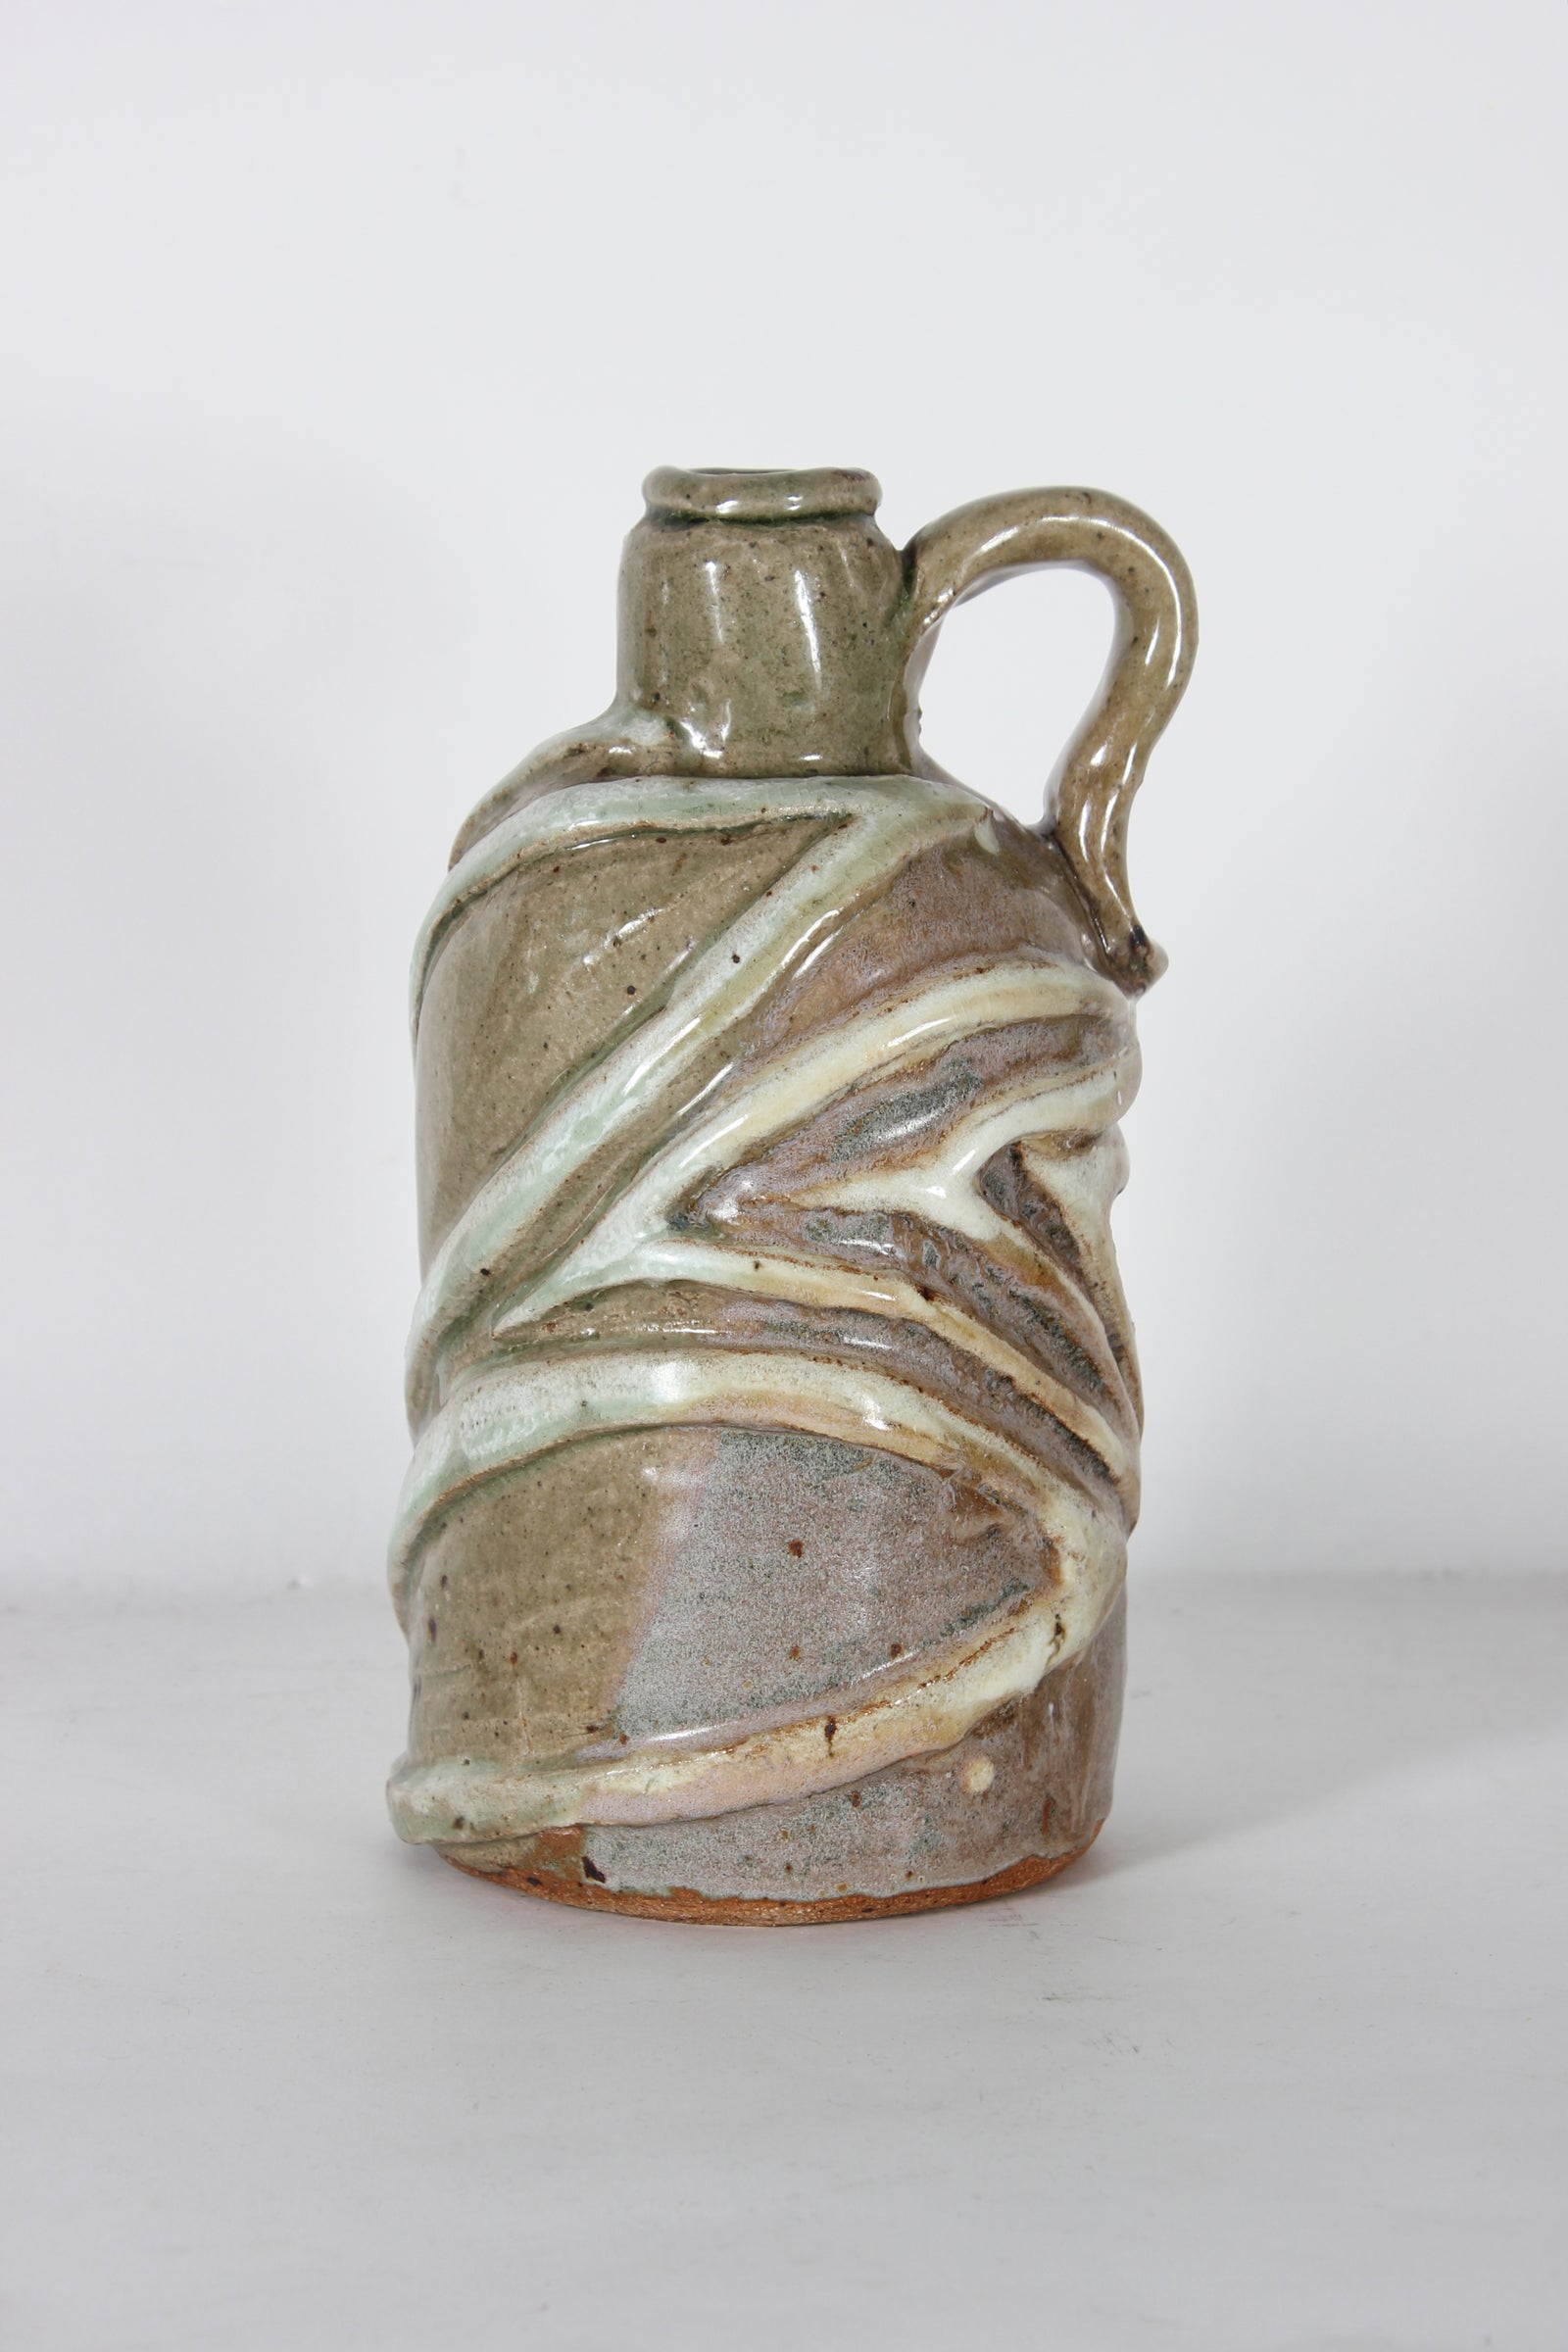 Neutral-Tone Vessel With Gray Details And Handle <br><br>#51580